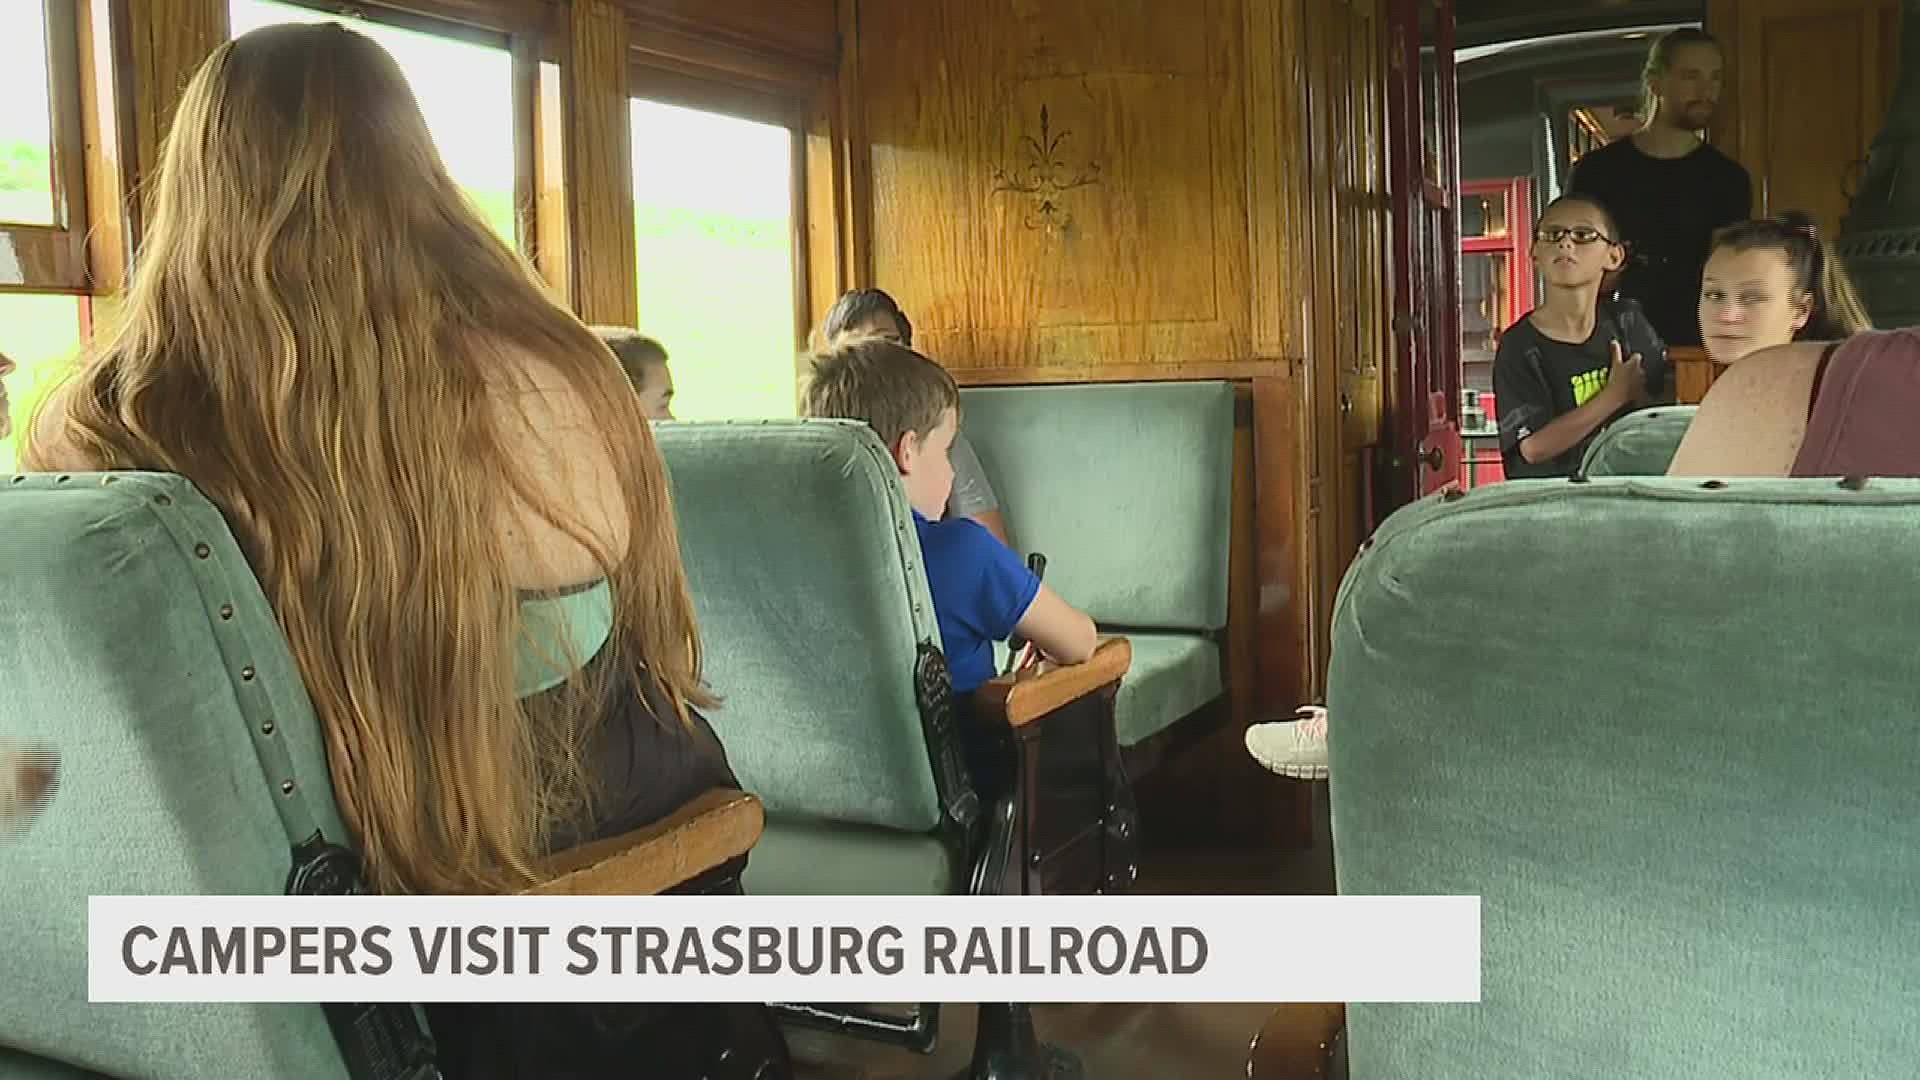 VisionCorps youth campers took a trip on the Strasburg Railroad in Lancaster County on Tuesday.